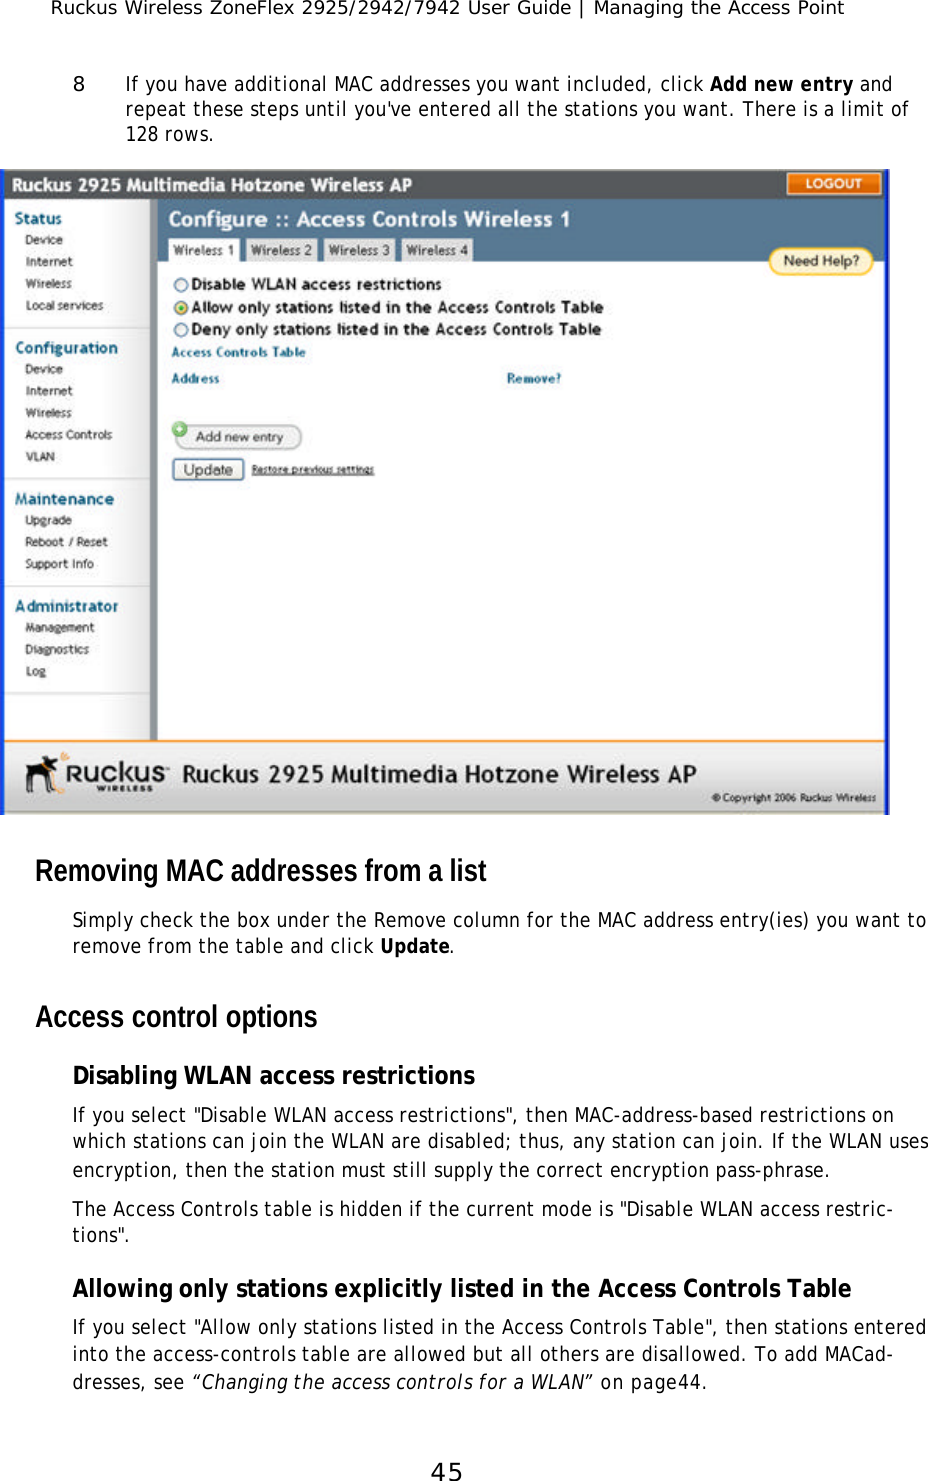 Ruckus Wireless ZoneFlex 2925/2942/7942 User Guide | Managing the Access Point458If you have additional MAC addresses you want included, click Add new entry and repeat these steps until you&apos;ve entered all the stations you want. There is a limit of 128 rows.Removing MAC addresses from a listSimply check the box under the Remove column for the MAC address entry(ies) you want to remove from the table and click Update.Access control optionsDisabling WLAN access restrictionsIf you select &quot;Disable WLAN access restrictions&quot;, then MAC-address-based restrictions on which stations can join the WLAN are disabled; thus, any station can join. If the WLAN uses encryption, then the station must still supply the correct encryption pass-phrase. The Access Controls table is hidden if the current mode is &quot;Disable WLAN access restric-tions&quot;.Allowing only stations explicitly listed in the Access Controls TableIf you select &quot;Allow only stations listed in the Access Controls Table&quot;, then stations entered into the access-controls table are allowed but all others are disallowed. To add MACad-dresses, see “Changing the access controls for a WLAN” on page44.